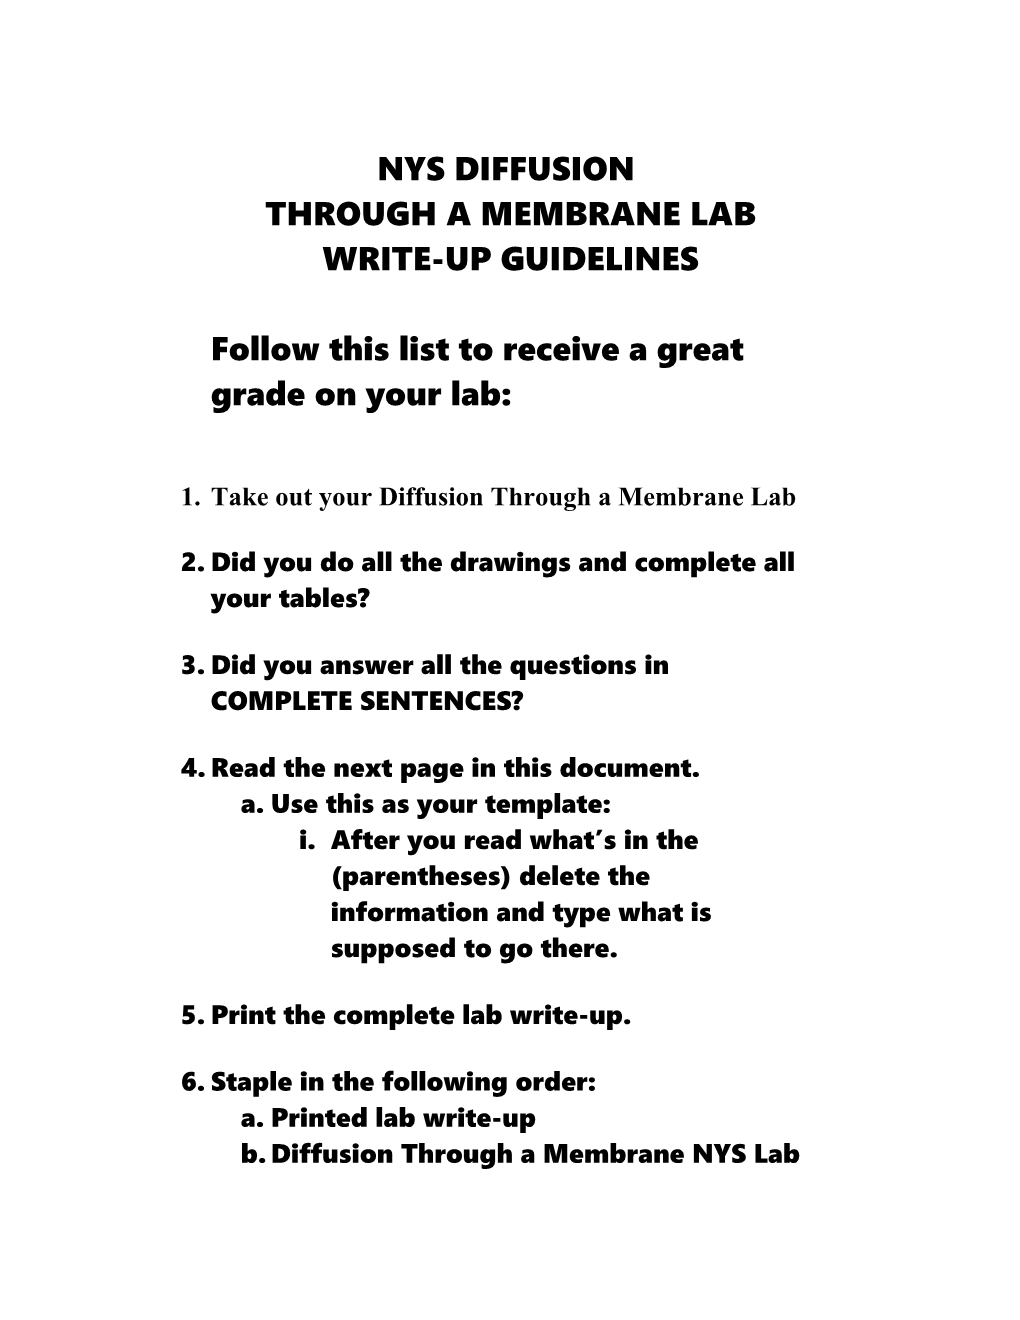 Through a Membrane Lab Write-Up Guidelines